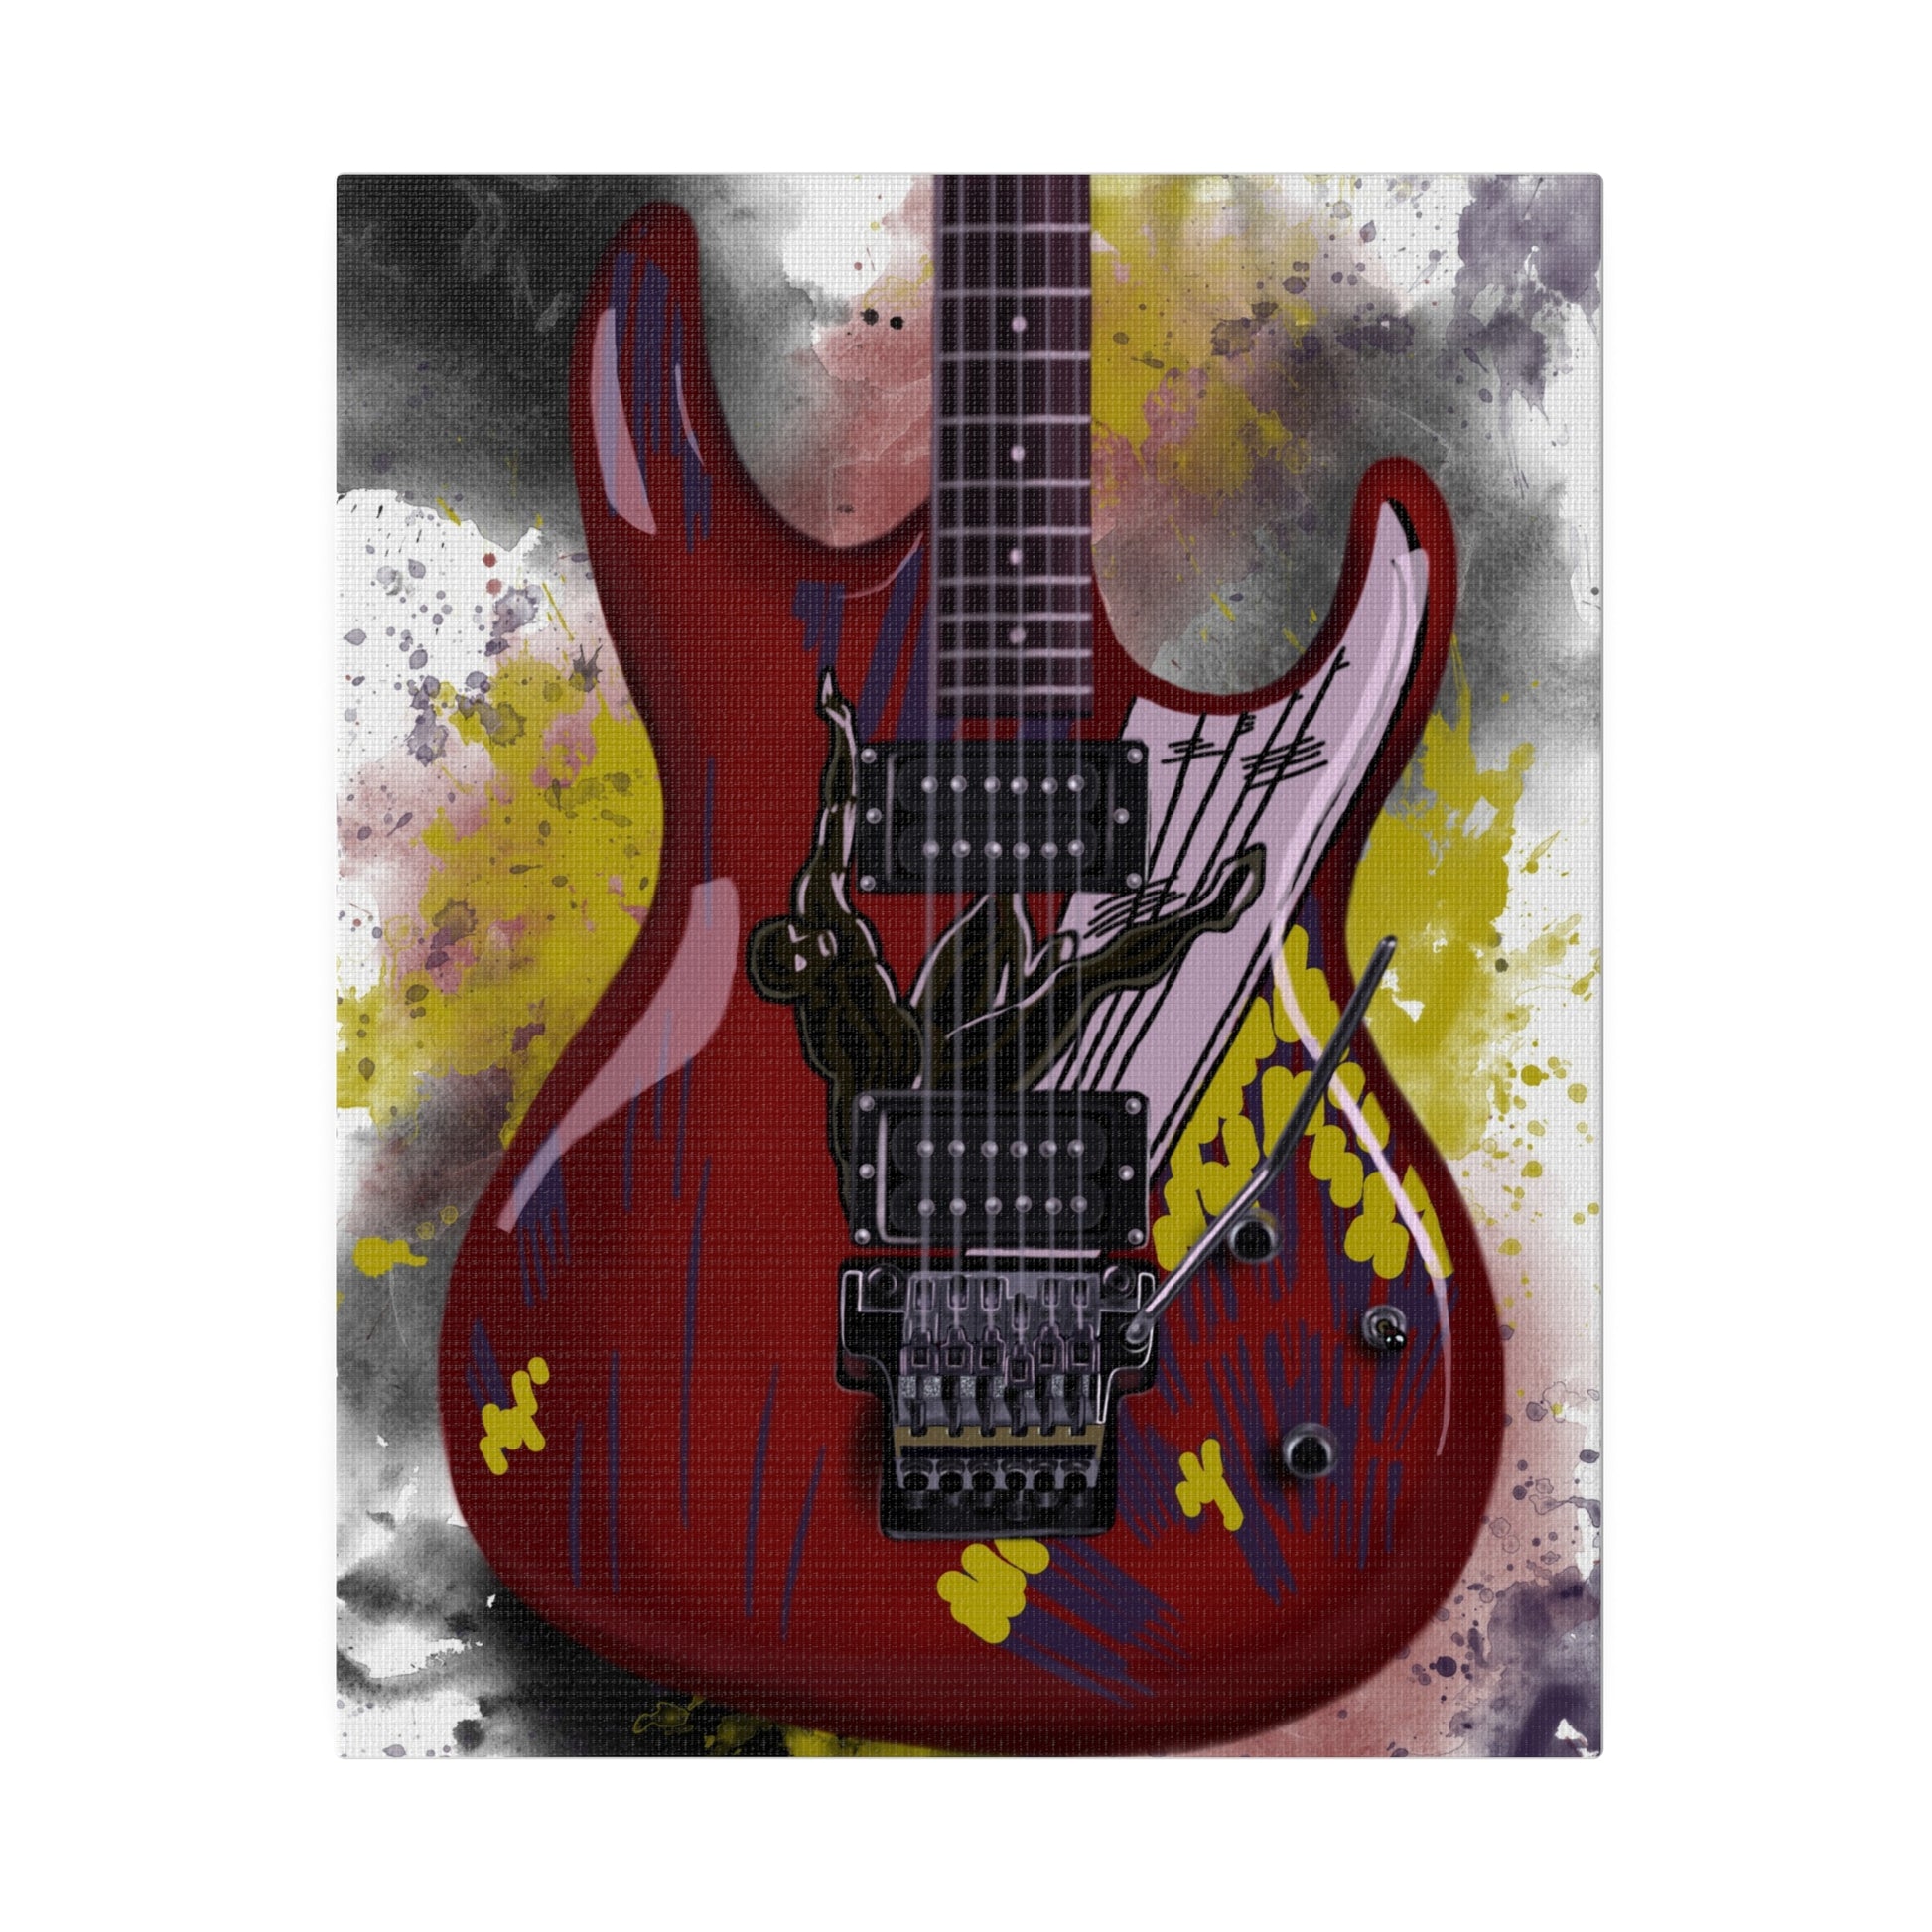 Digital painting of the alien electric guitar printed on canvas